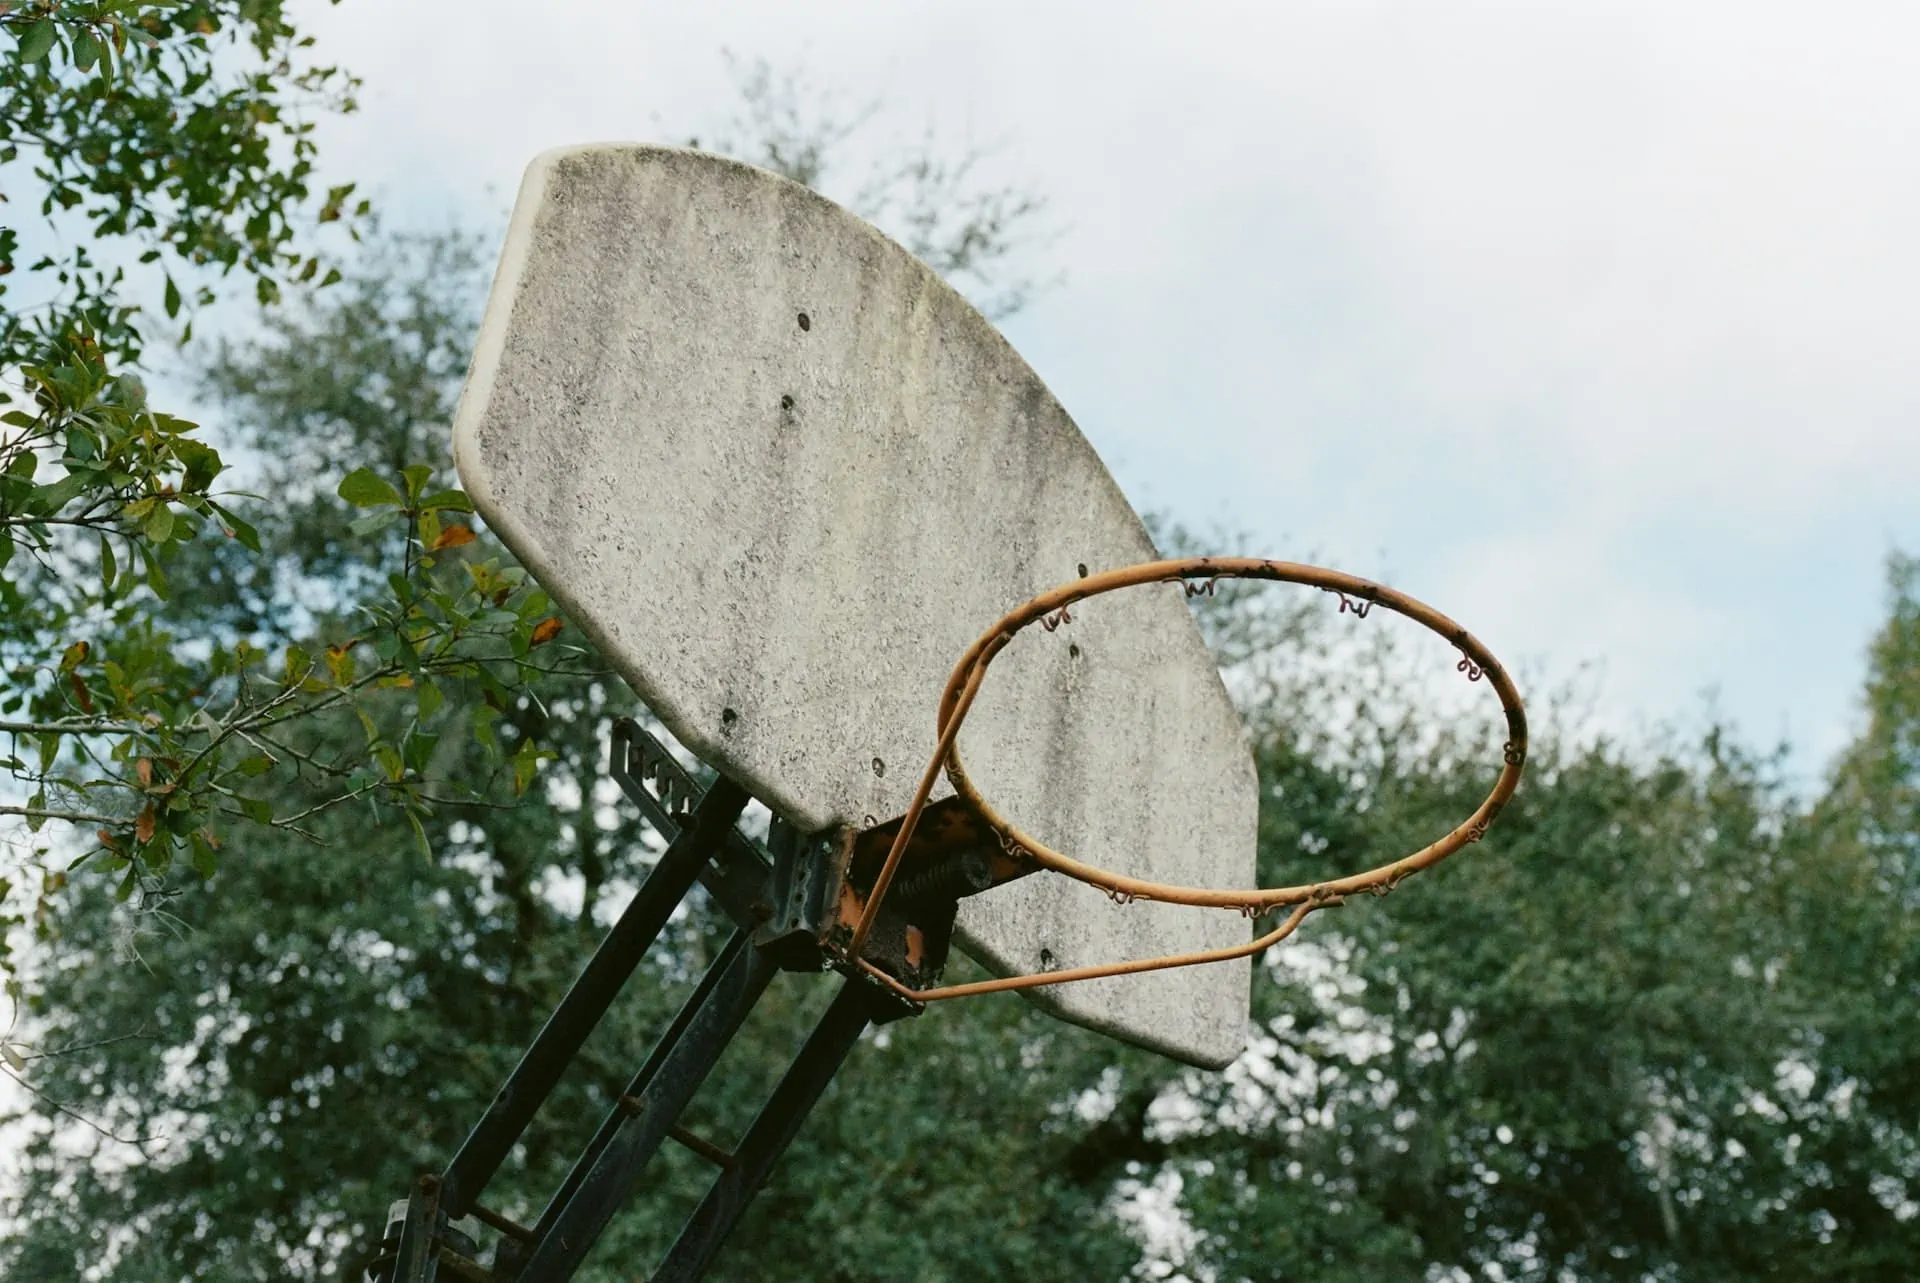 Nets are Absent from These Public Basketball Courts